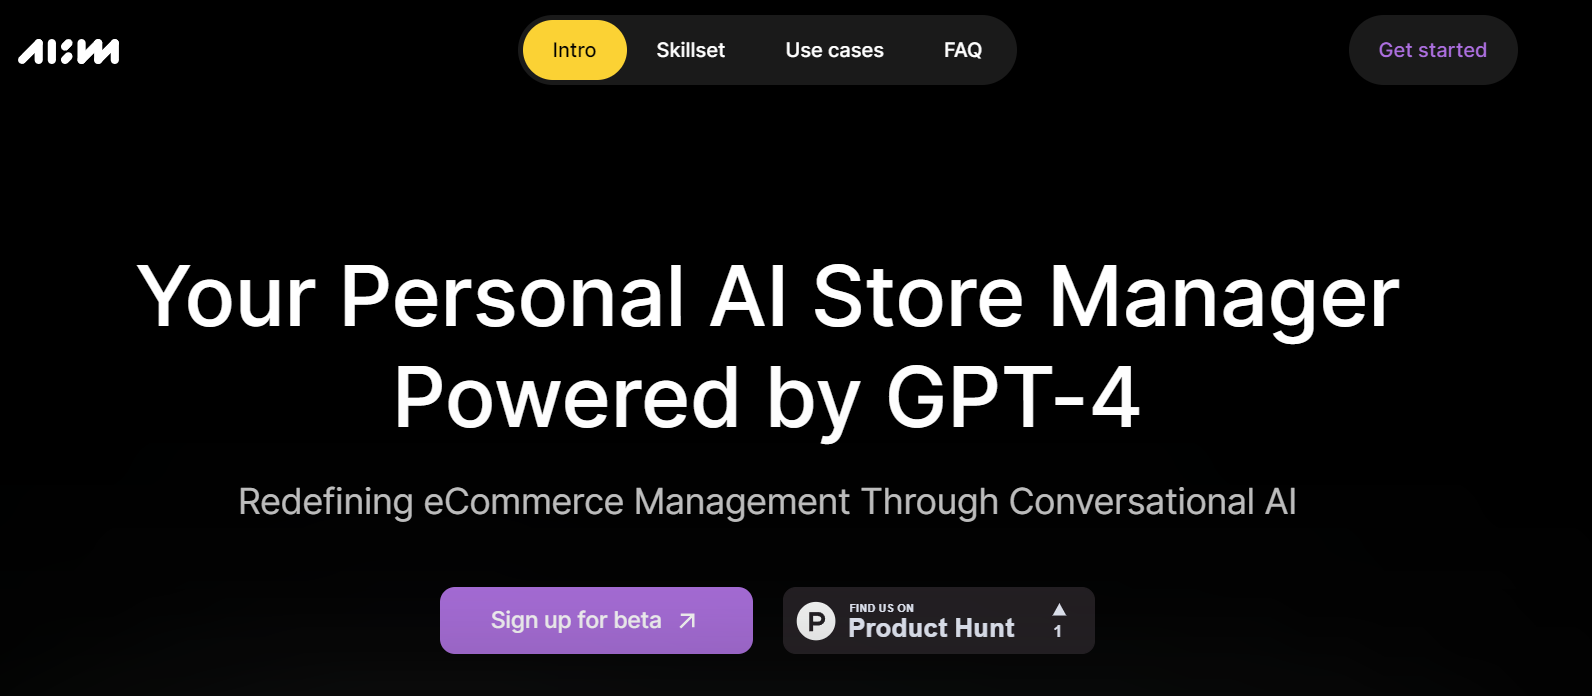 6. AI Store Manager